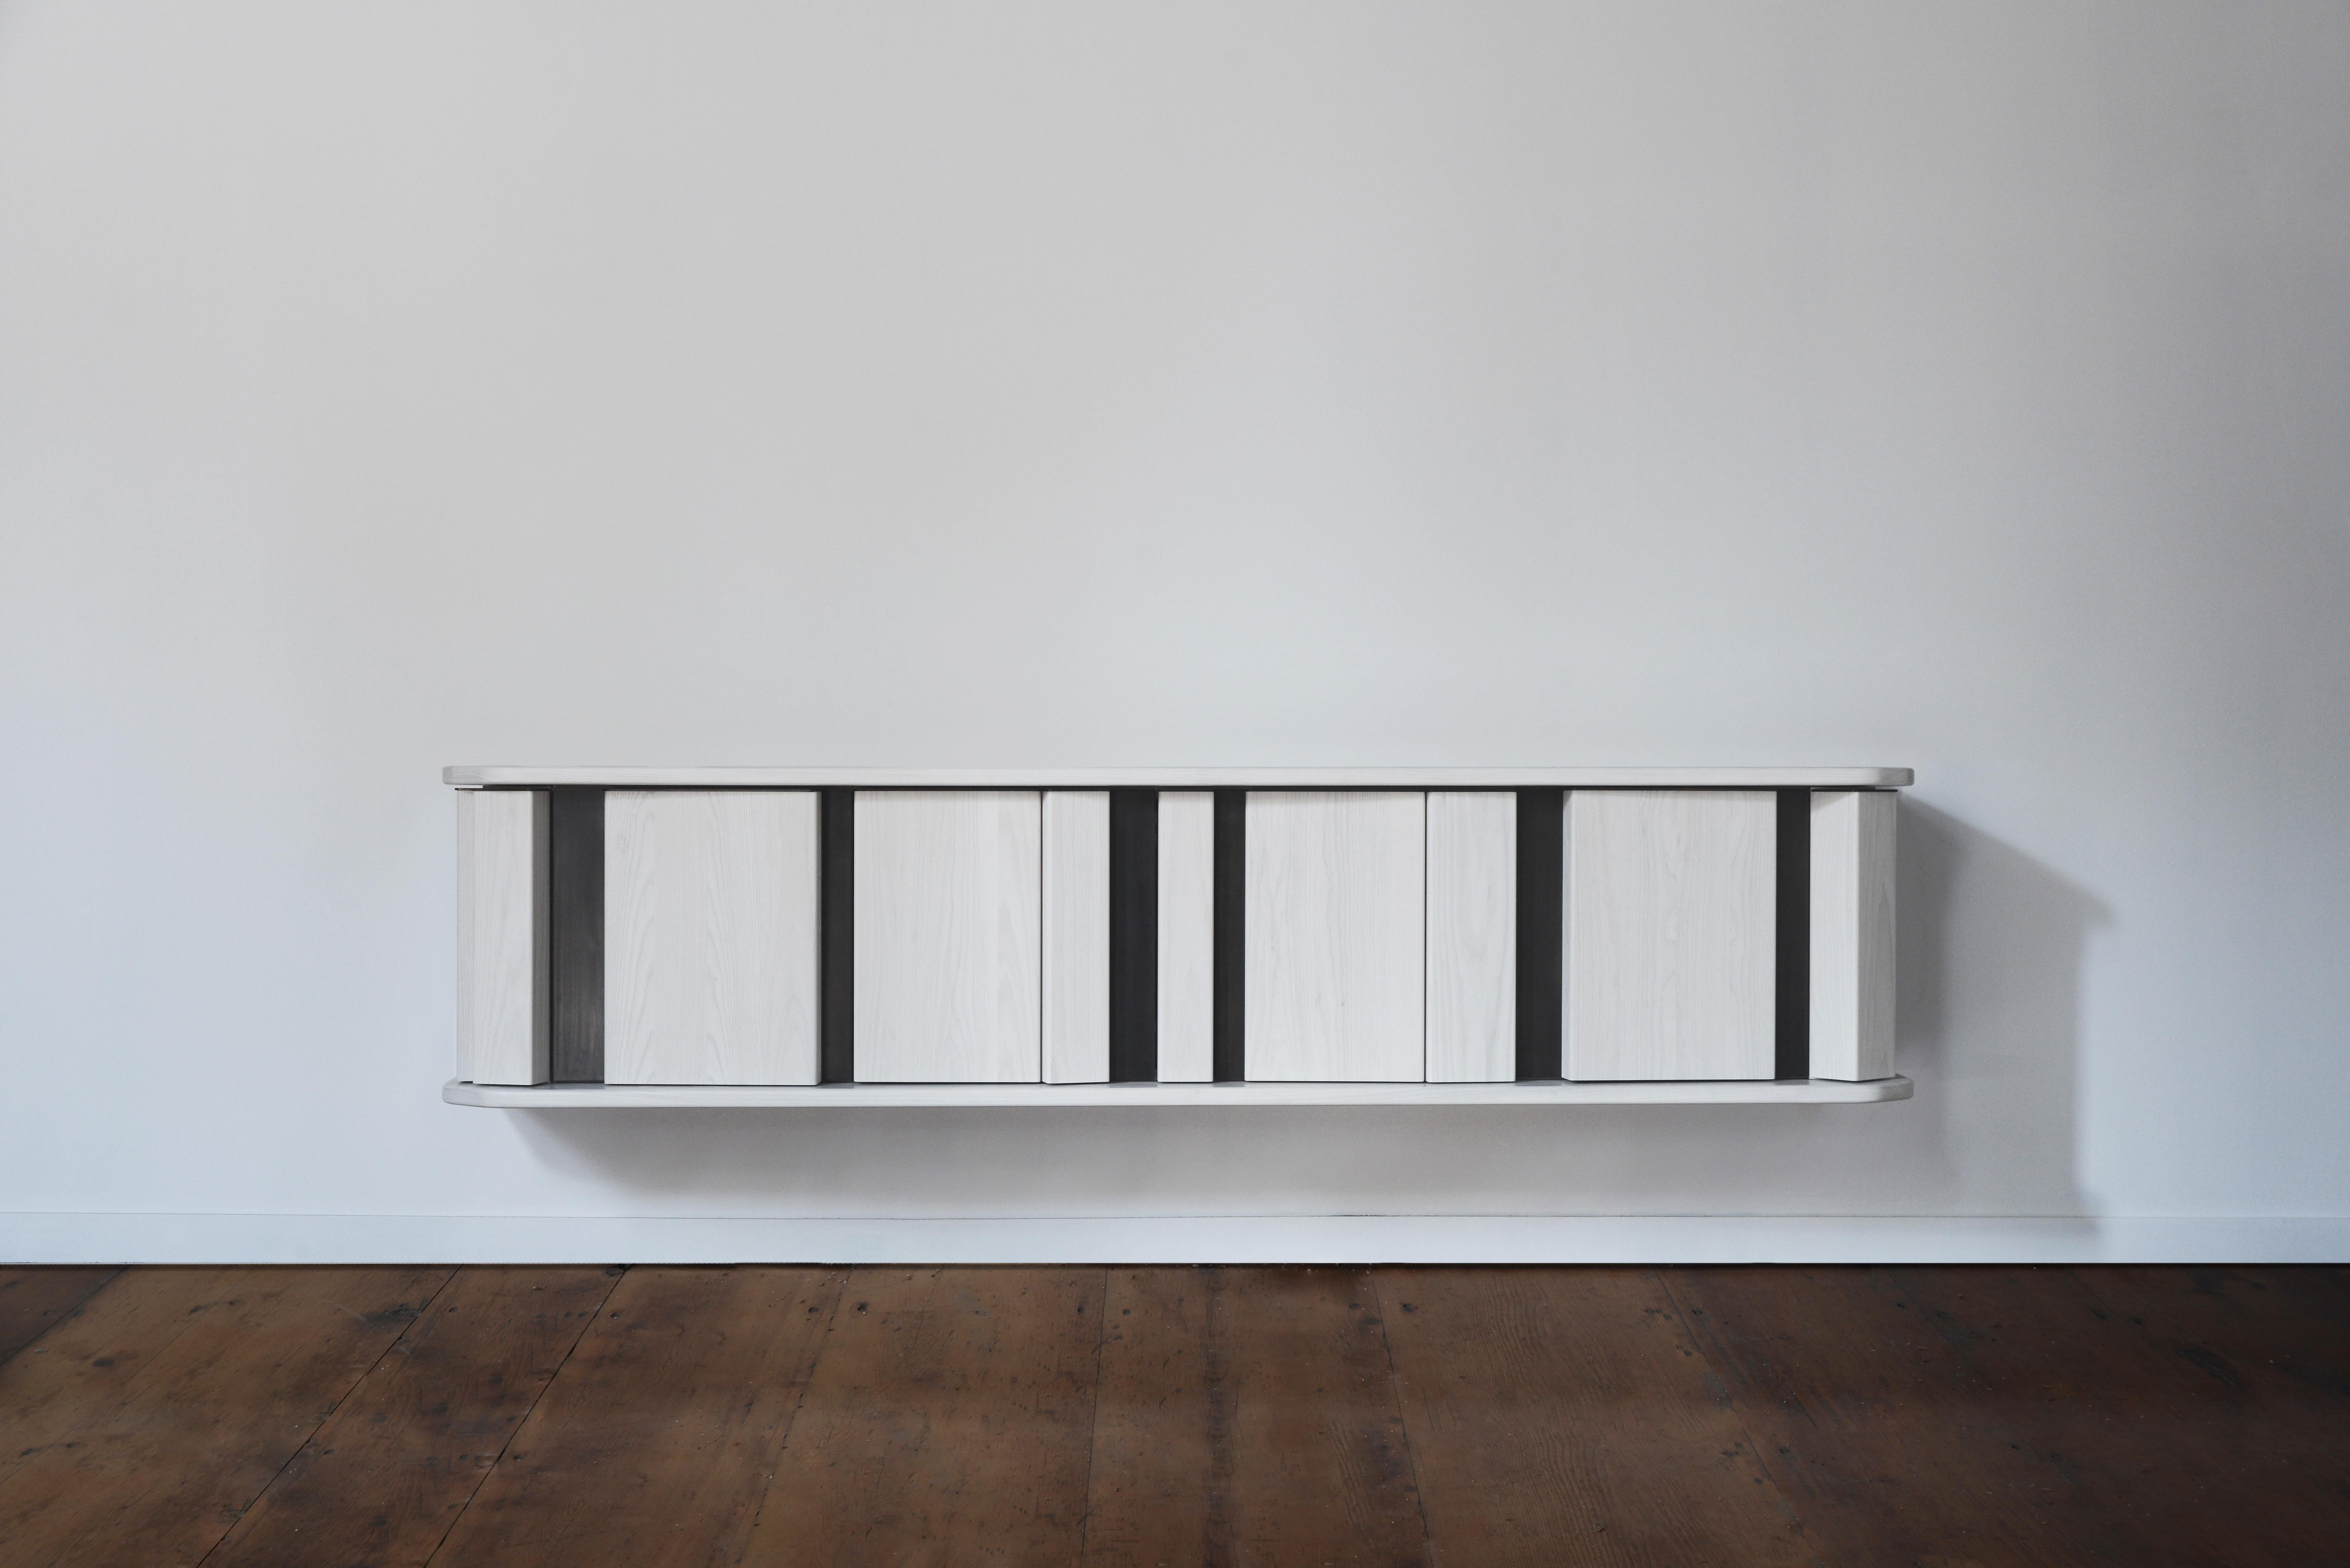 The diamond sideboard plays with different planes. A collection of rectangular columns placed at random angles and depths forms a facade interrupted by two thick horizontal planes of solid wood. This array of volumes serves as doors to a fully